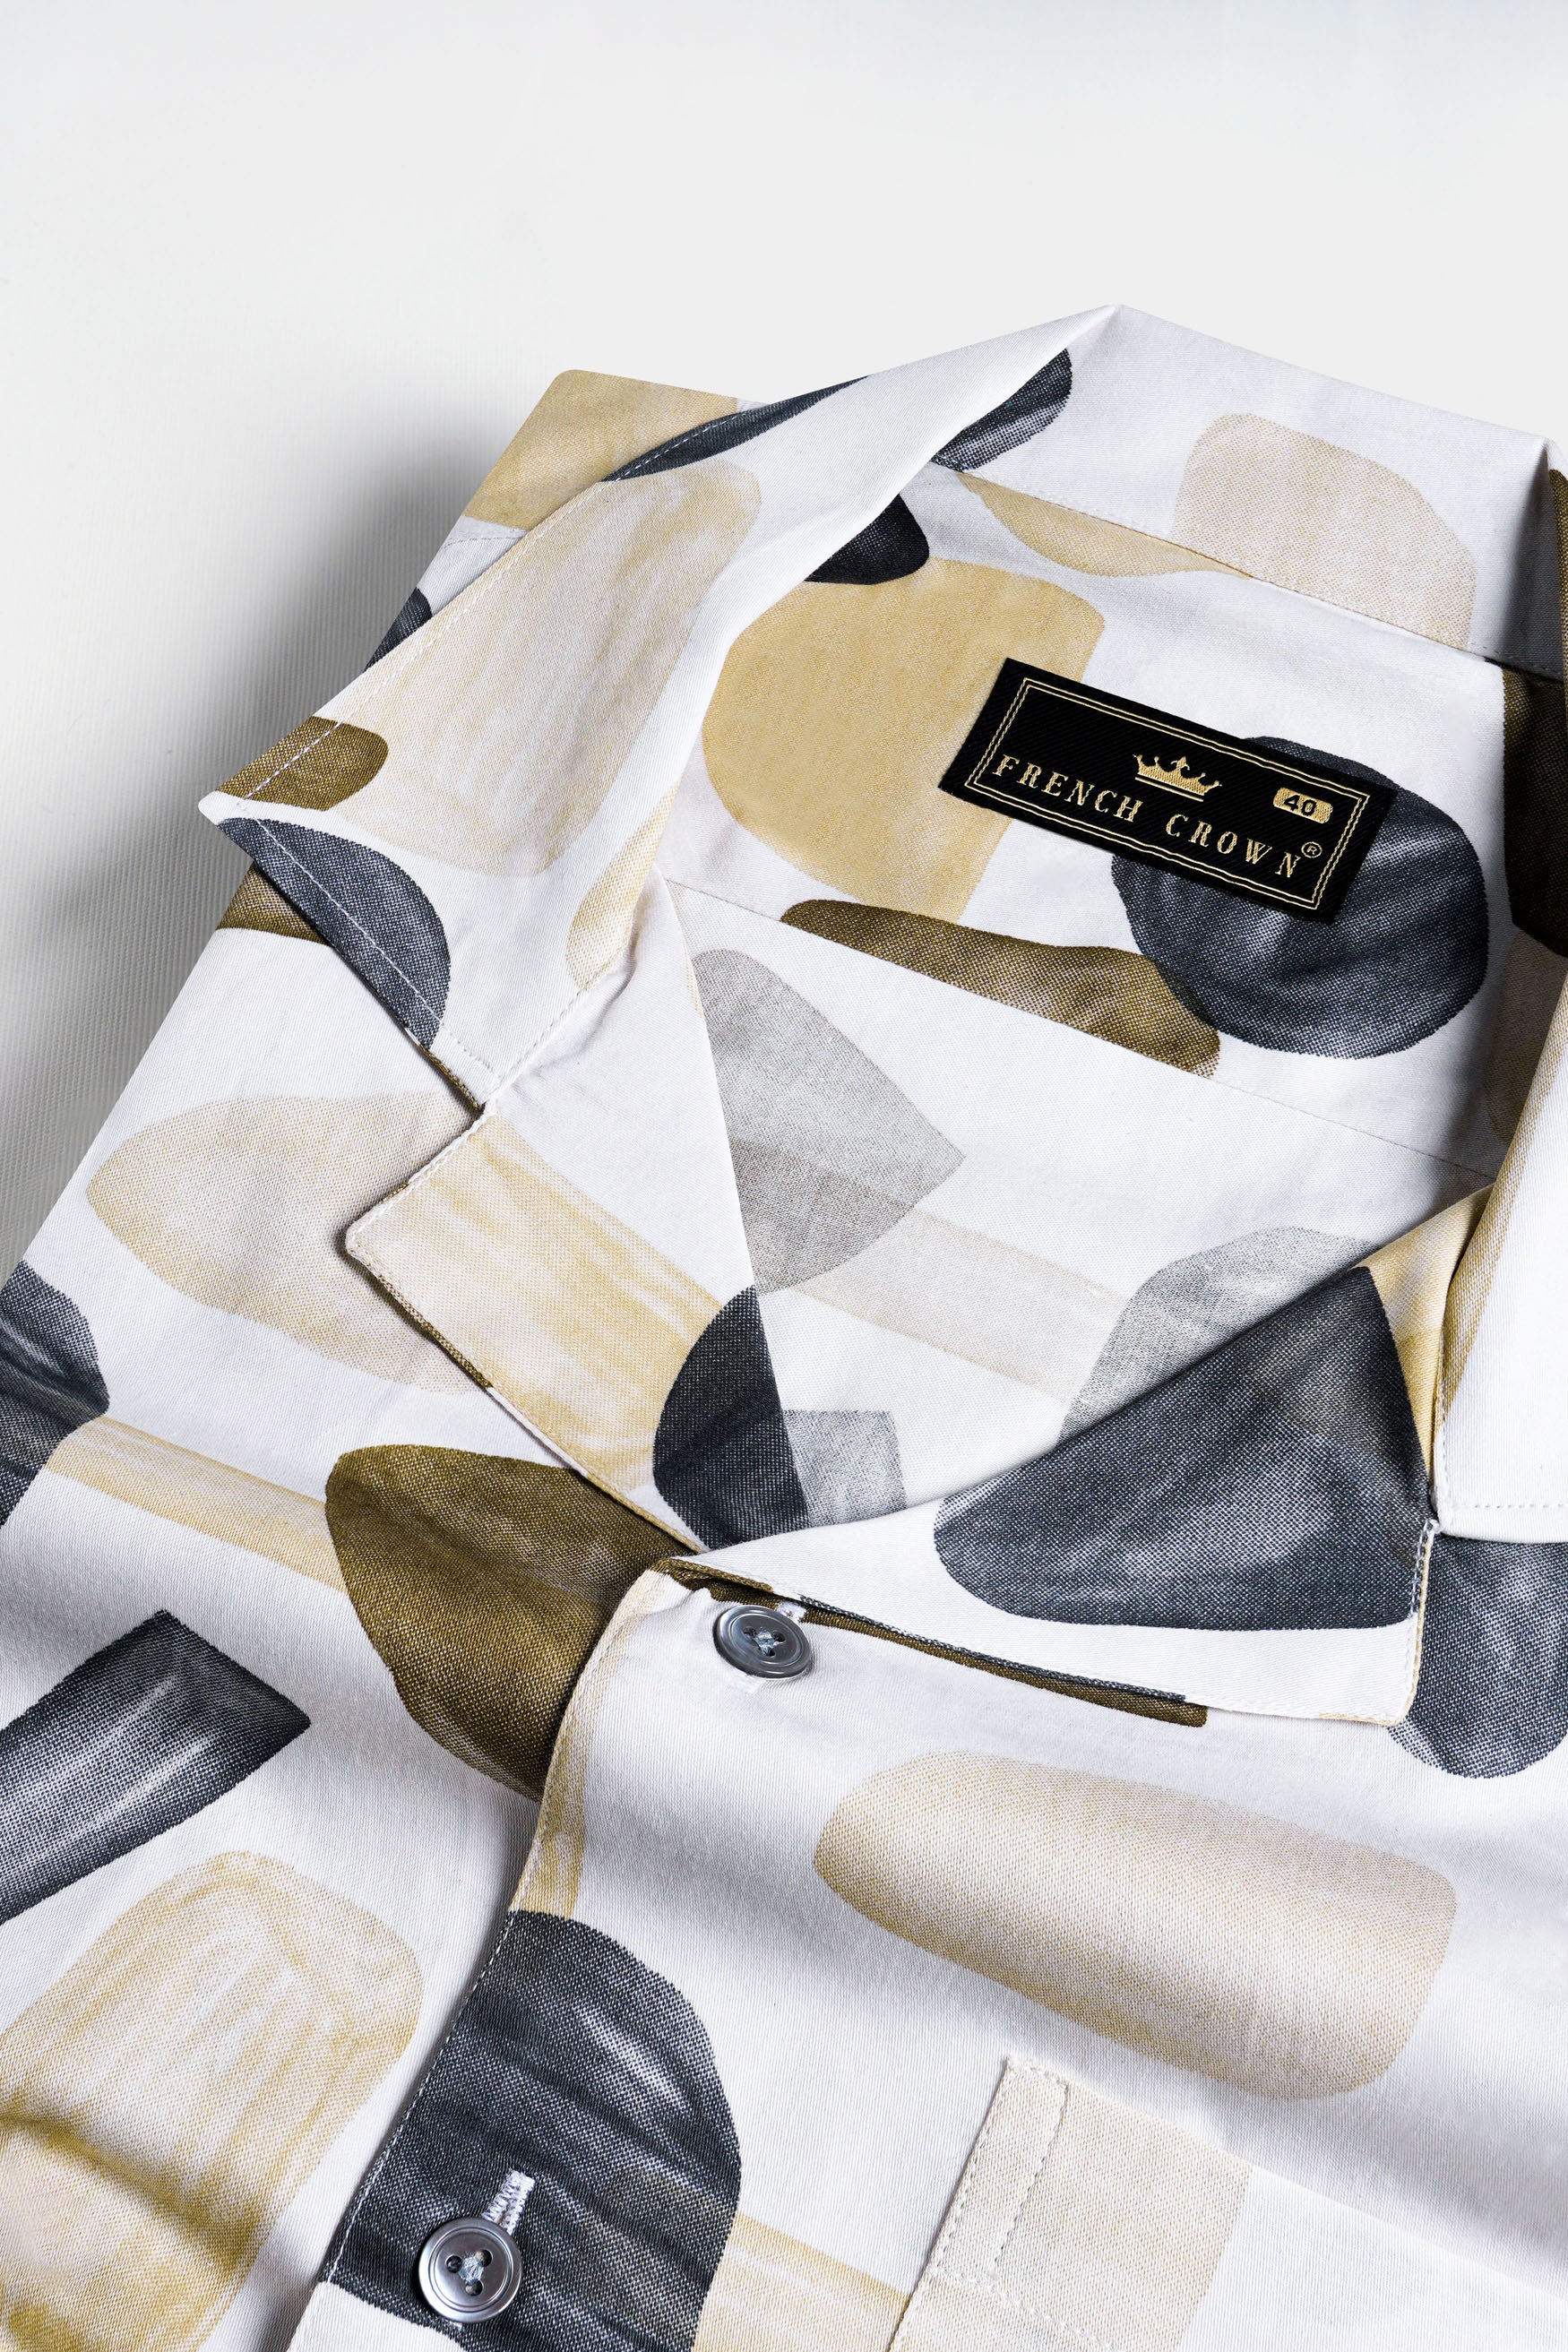 Bright White and Umber Brown Abstract Printed Subtle Sheen Super Soft Premium Cotton Shirt 11716-CC-SS-GREY-38, 11716-CC-SS-GREY-39, 11716-CC-SS-GREY-40, 11716-CC-SS-GREY-42, 11716-CC-SS-GREY-44, 11716-CC-SS-GREY-46, 11716-CC-SS-GREY-48, 11716-CC-SS-GREY-50, 11716-CC-SS-GREY-52